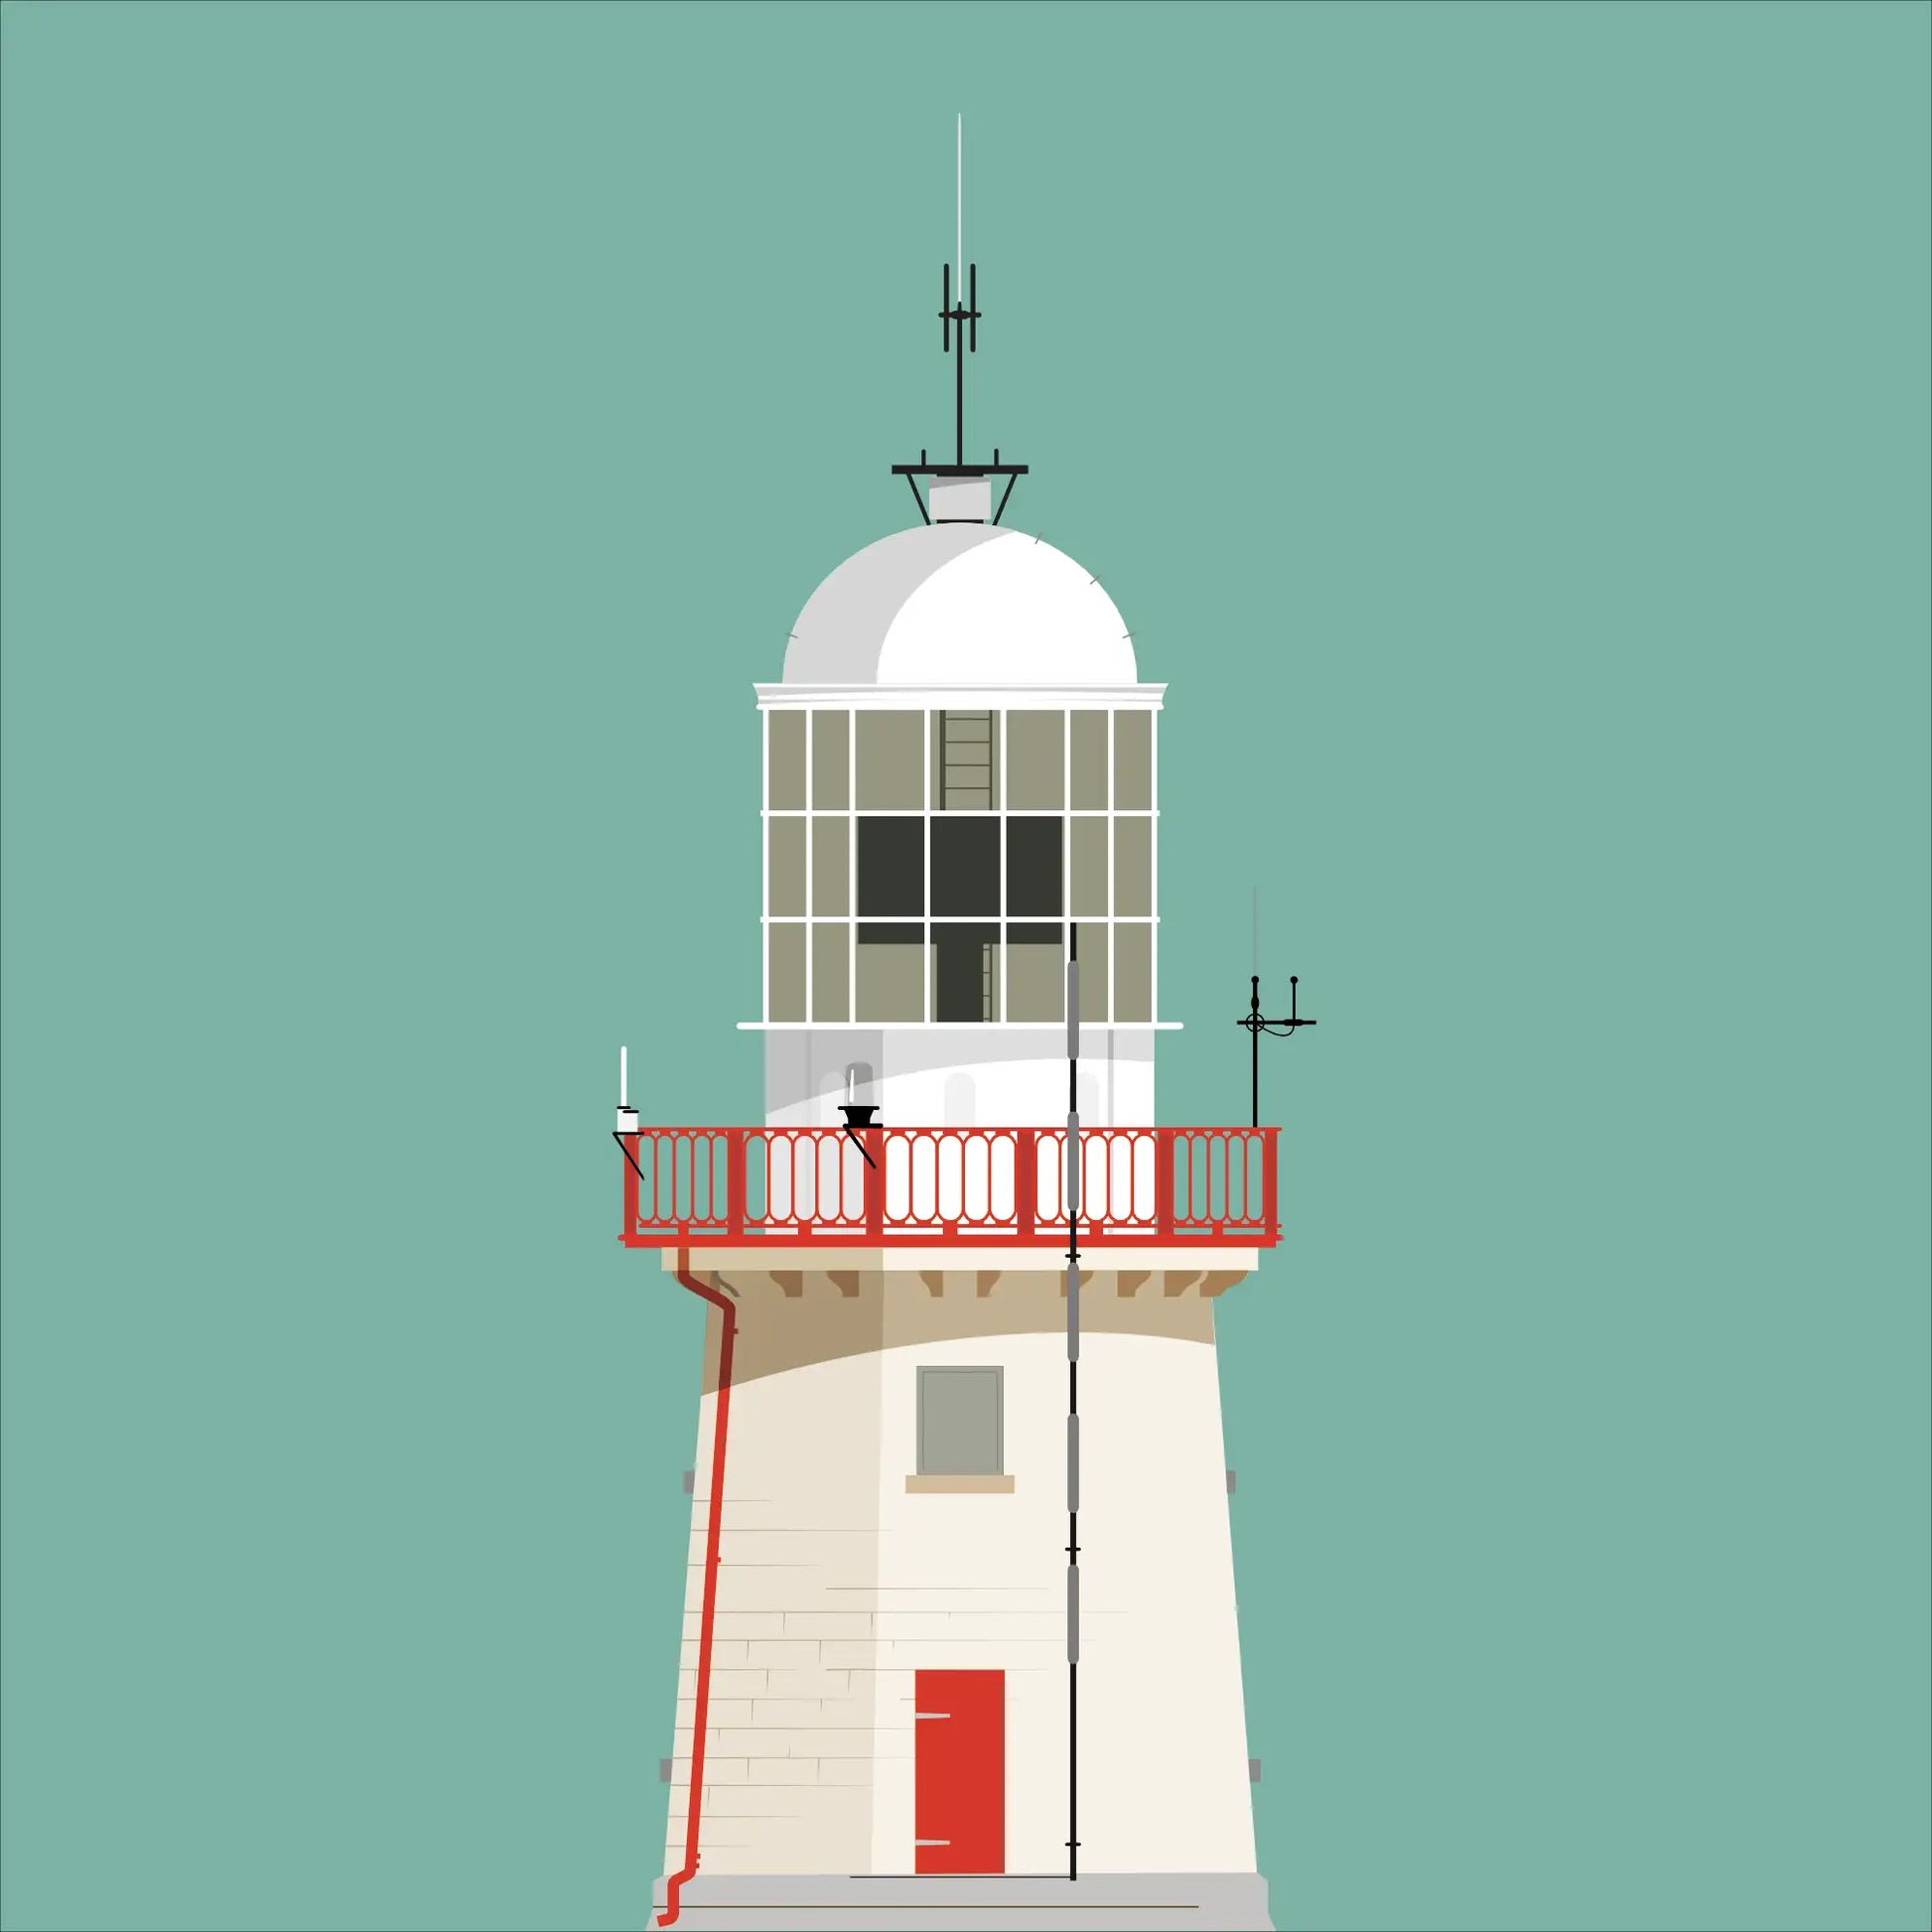 Illustration of The Baily lighthouse on a white background inside light blue square